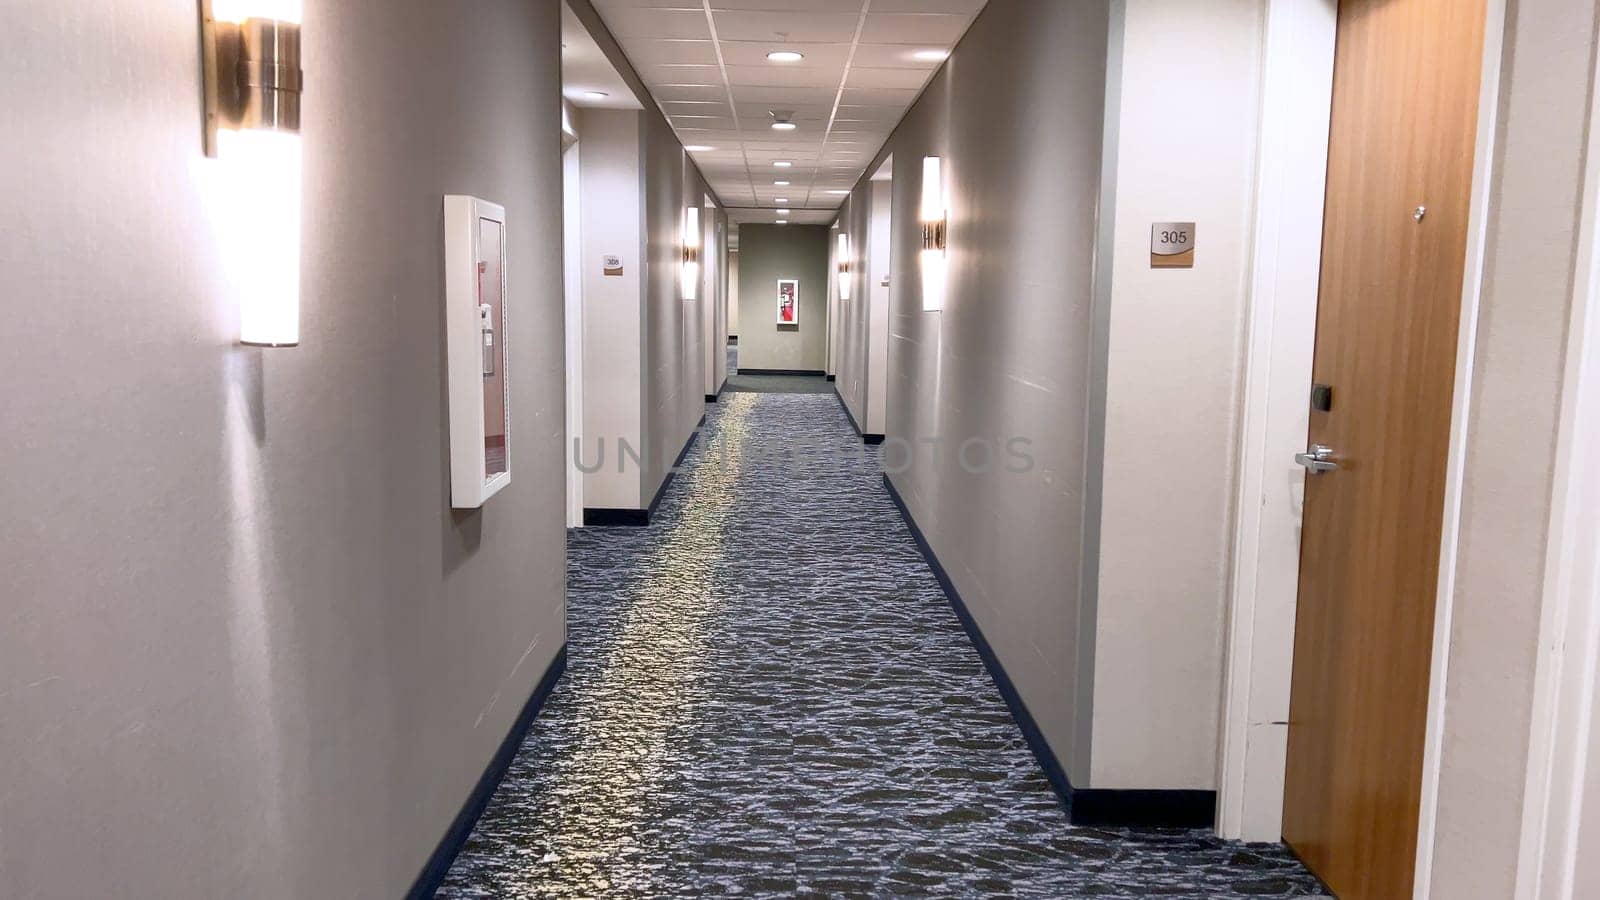 Ft Collins, Colorado, USA-March 23, 2024-A well-lit hallway stretches into the distance in a modern hotel, featuring elegant carpeting, clean lines, and a series of numbered doors on either side.